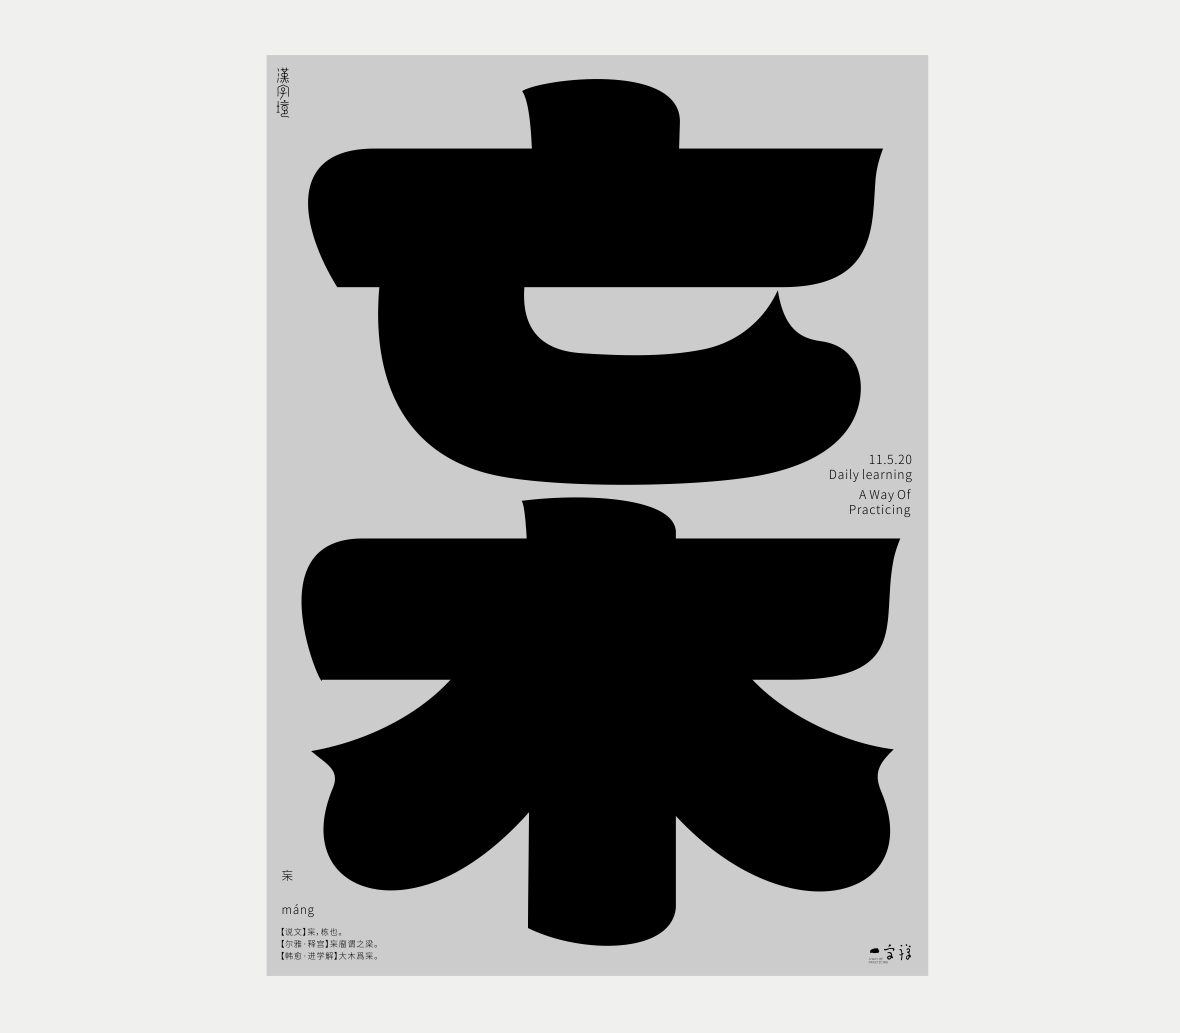 Abstract Chinese Font Design